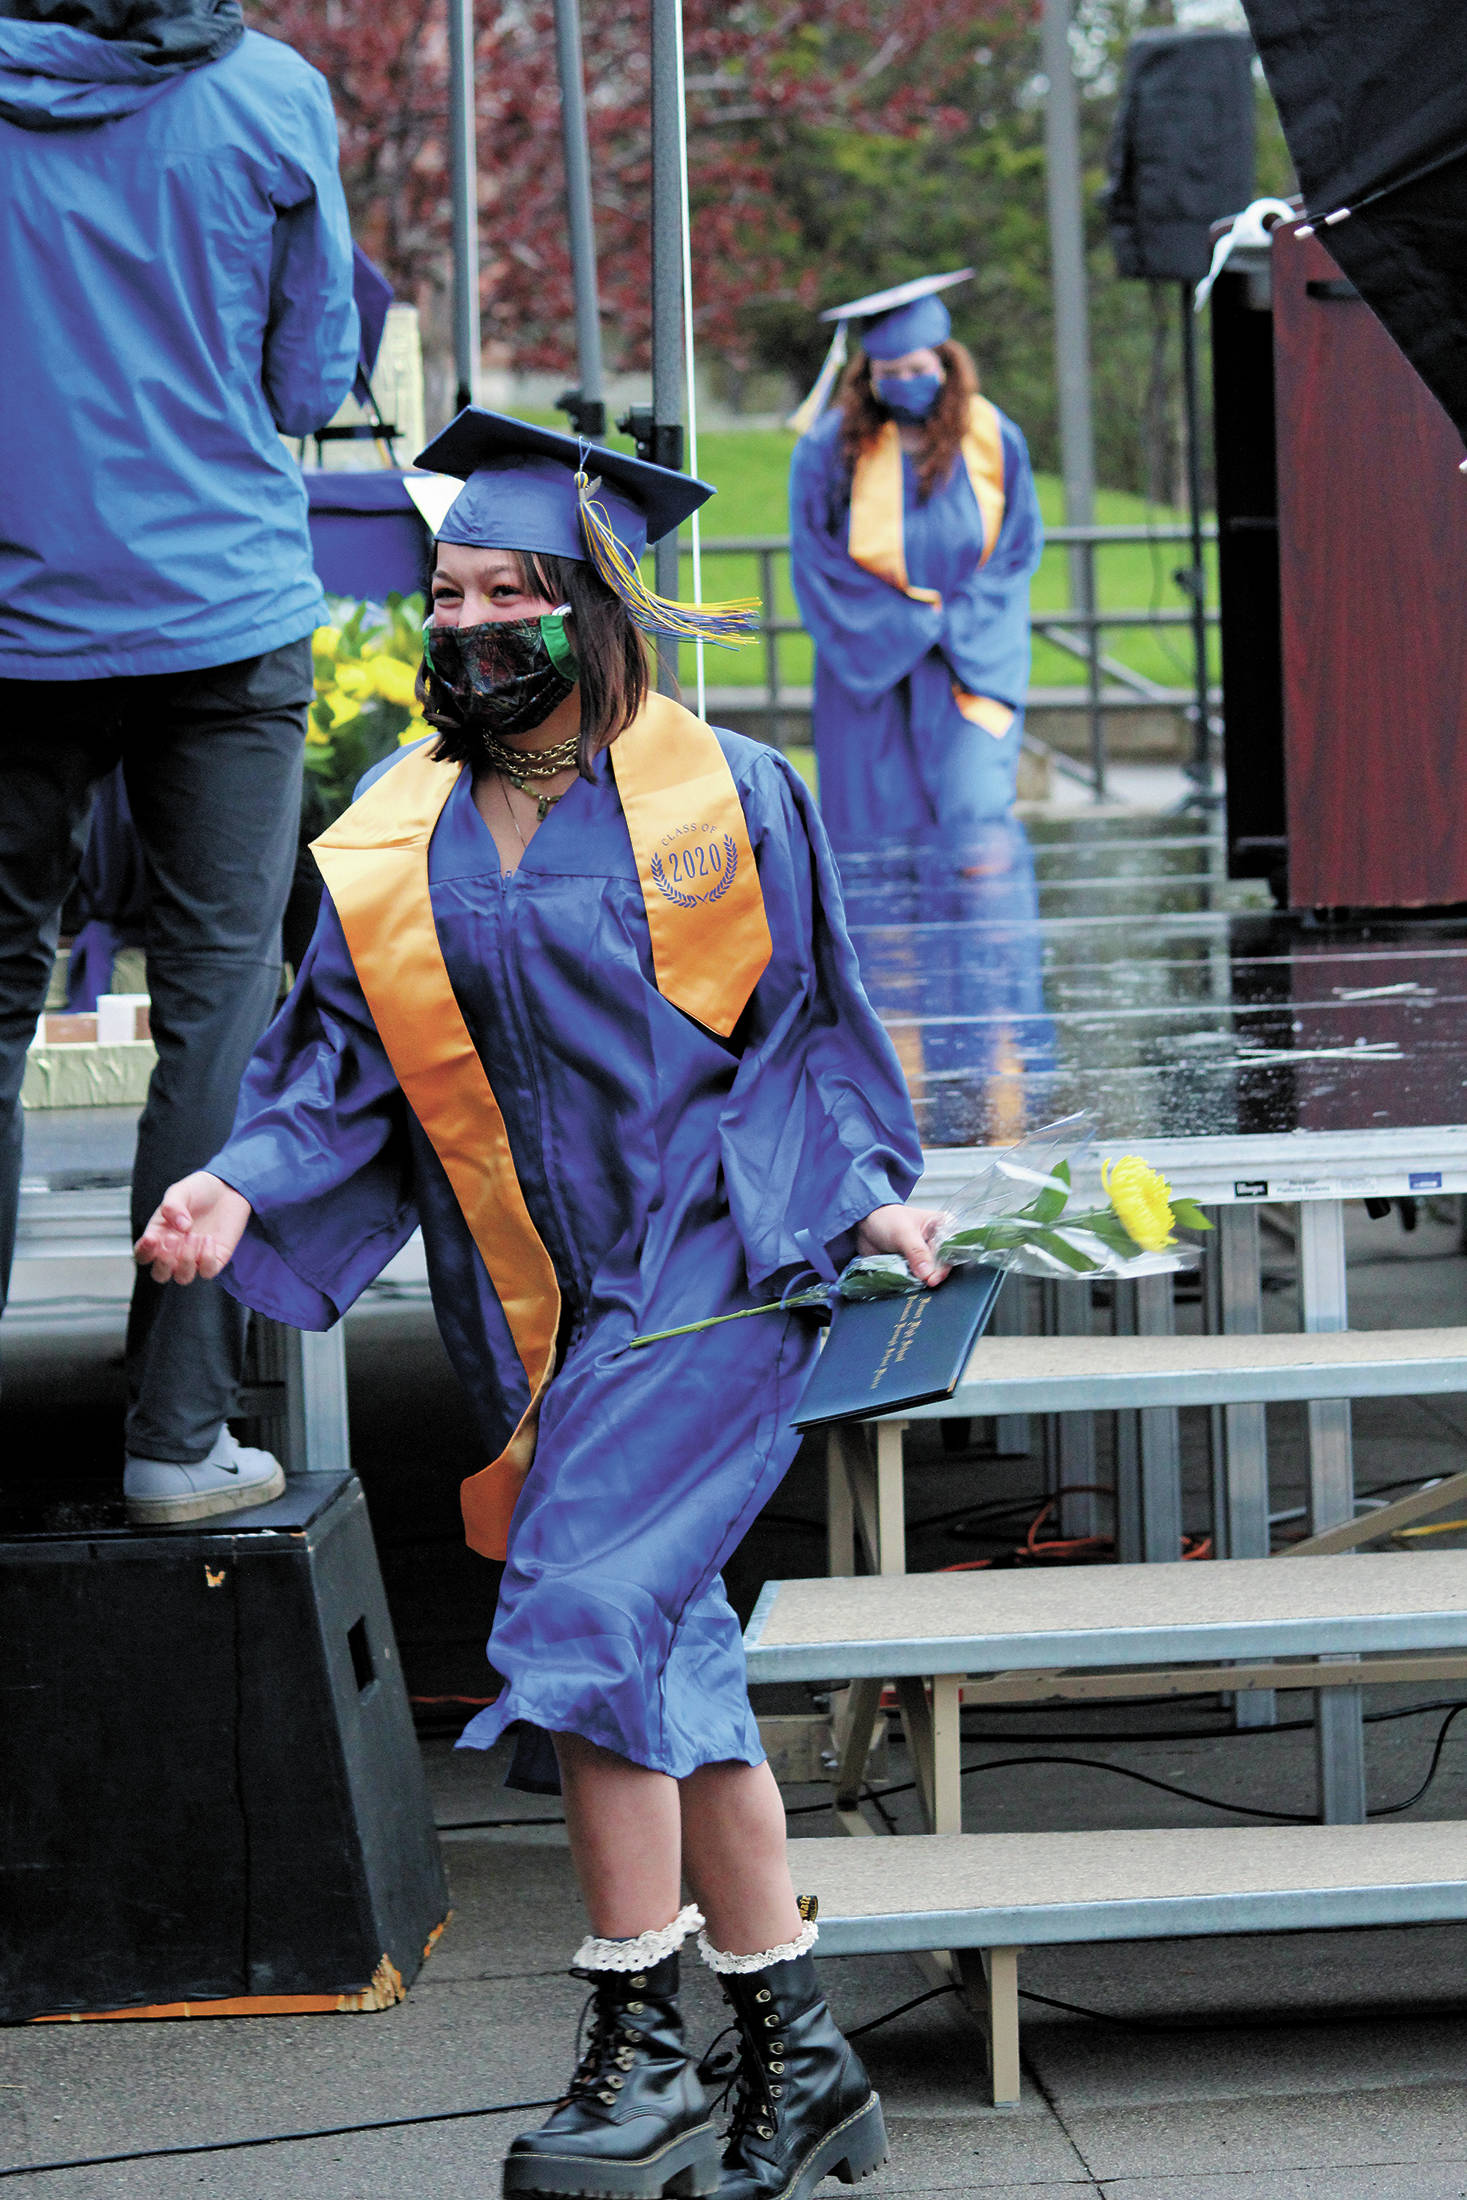 Graduate Mina Cavasos descends the stairs of a stage constructed outside Homer High School to have her picture taken after collecting her diploma during the school’s drive-through commencement ceremony Monday, May 18, 2020 at the school in Homer, Alaska. (Photo by Megan Pacer/Homer News)